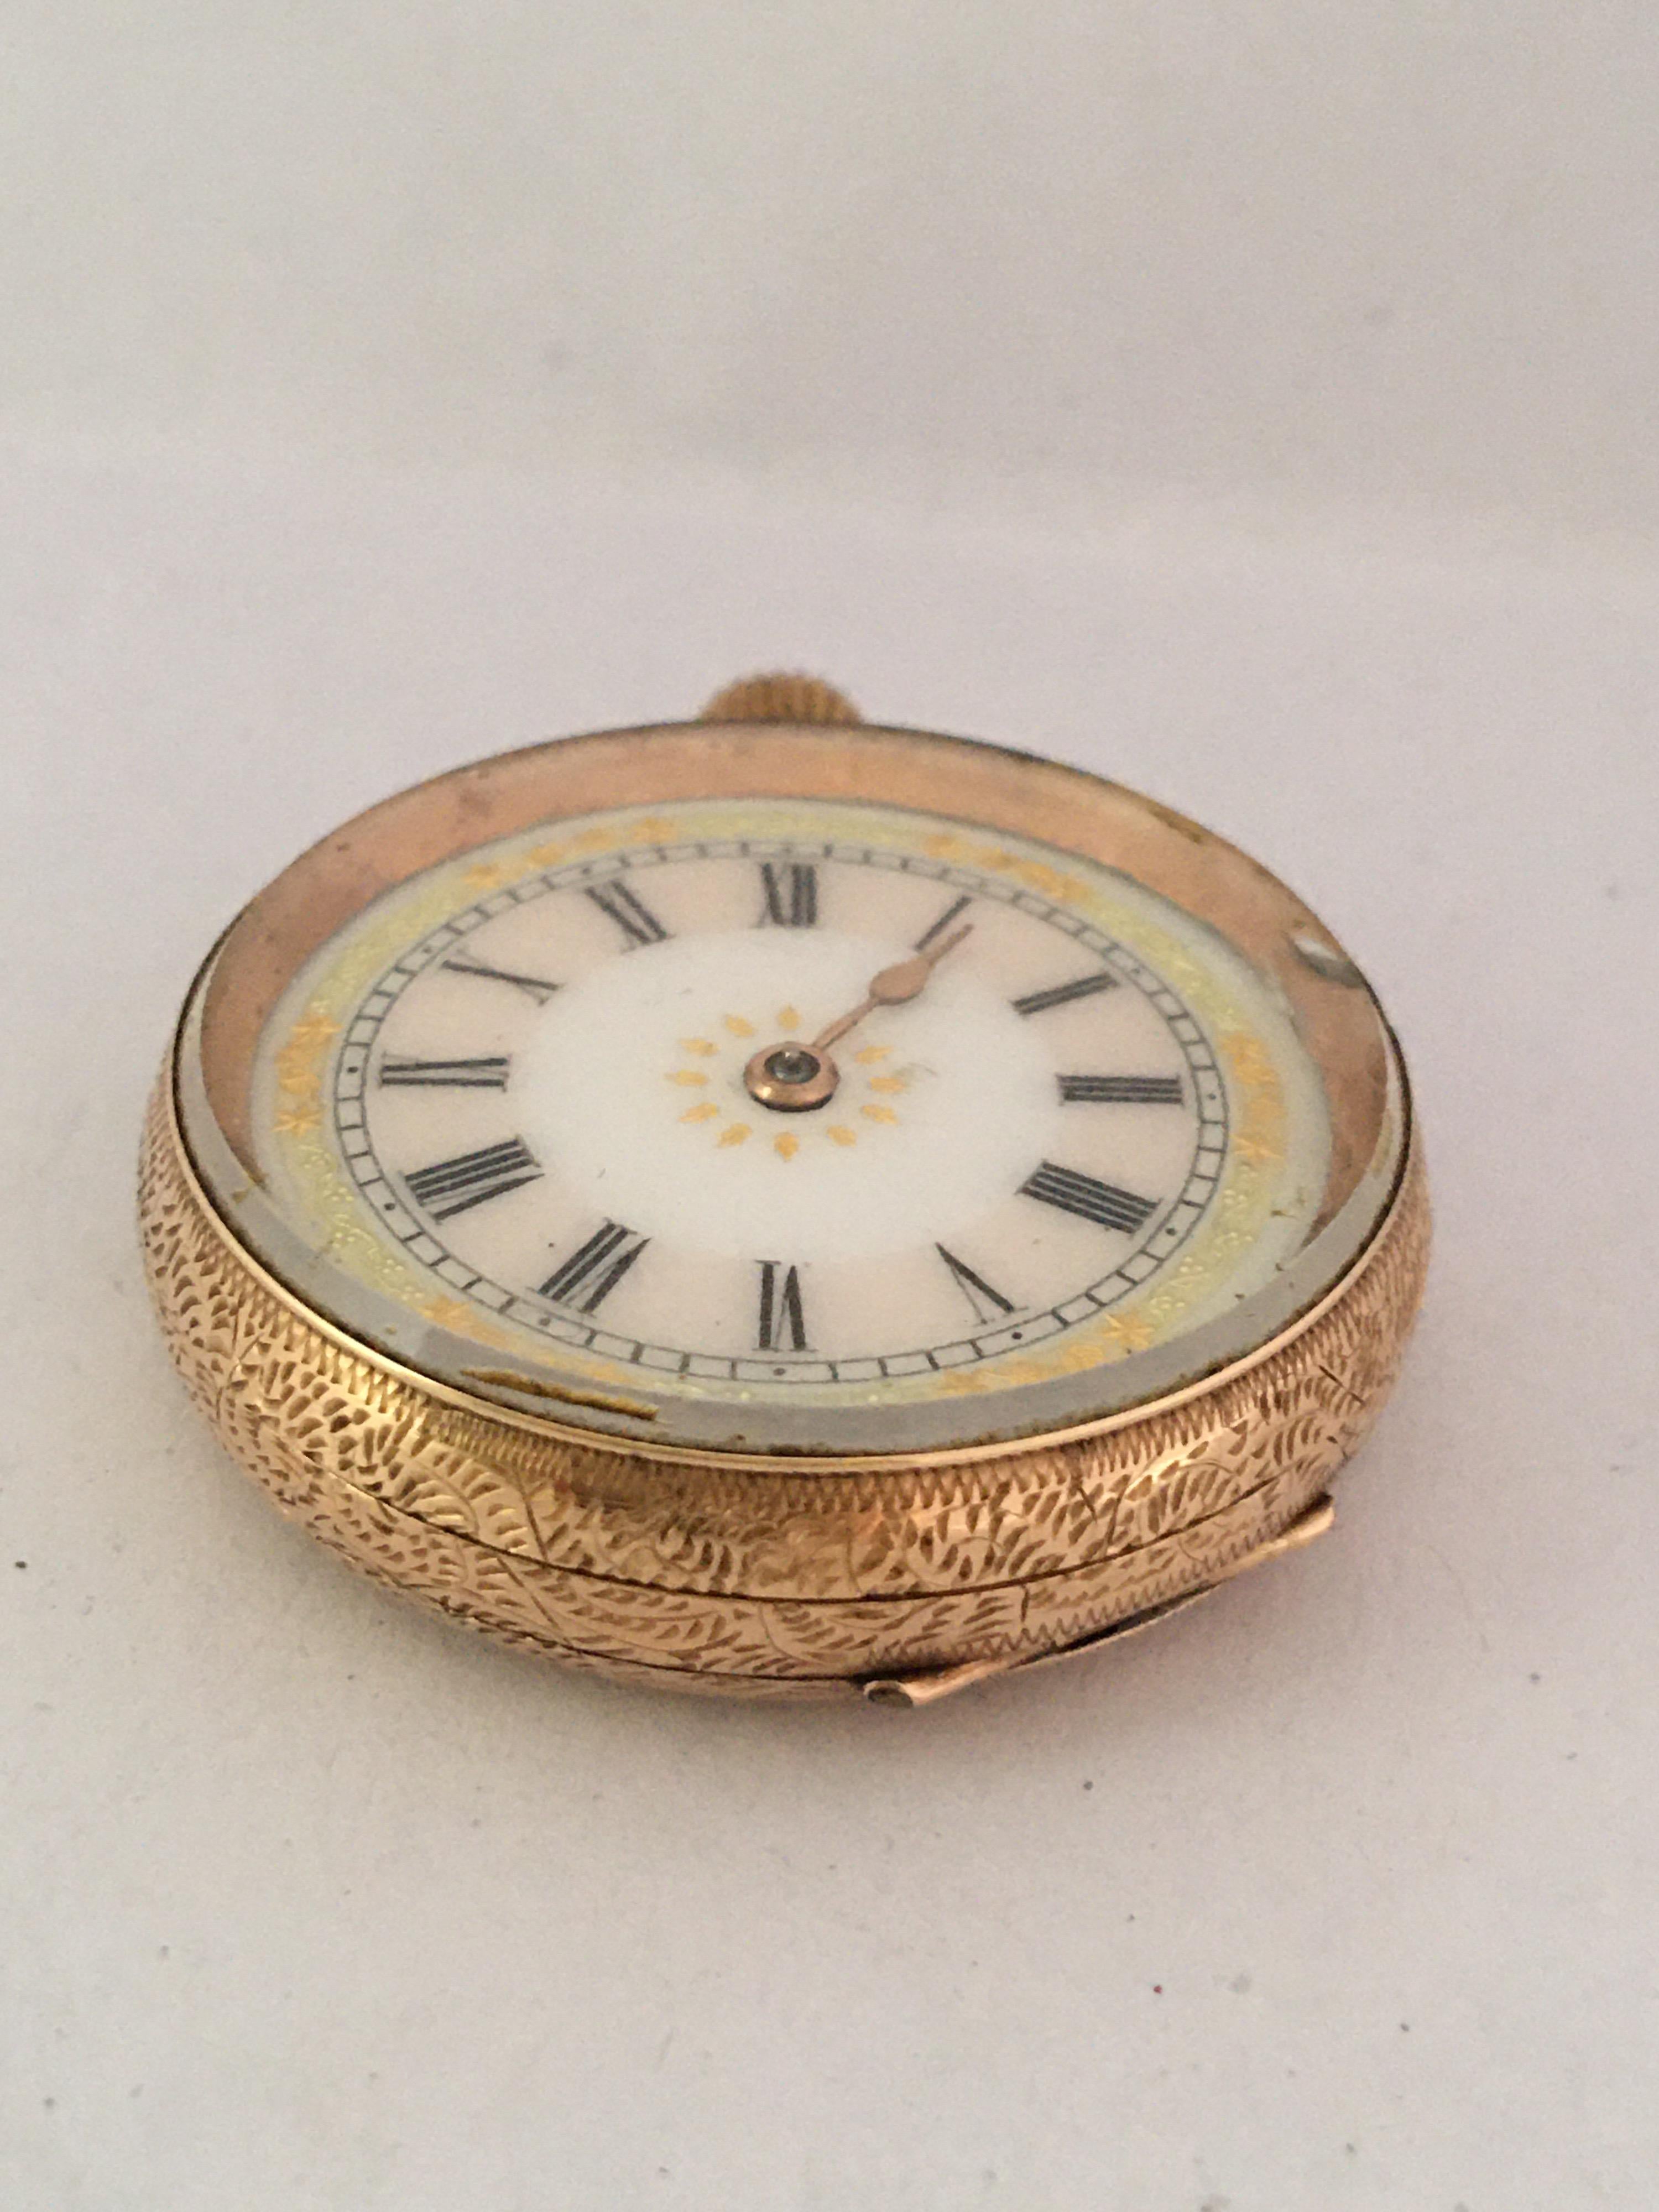 This beautiful 33mm diameter antique mechanical gold ladies watch is in good working condition and it is running well. Visible signs of ageing and wear with light marks on the glass and on the watch case as shown. The minute hand and the metal ring